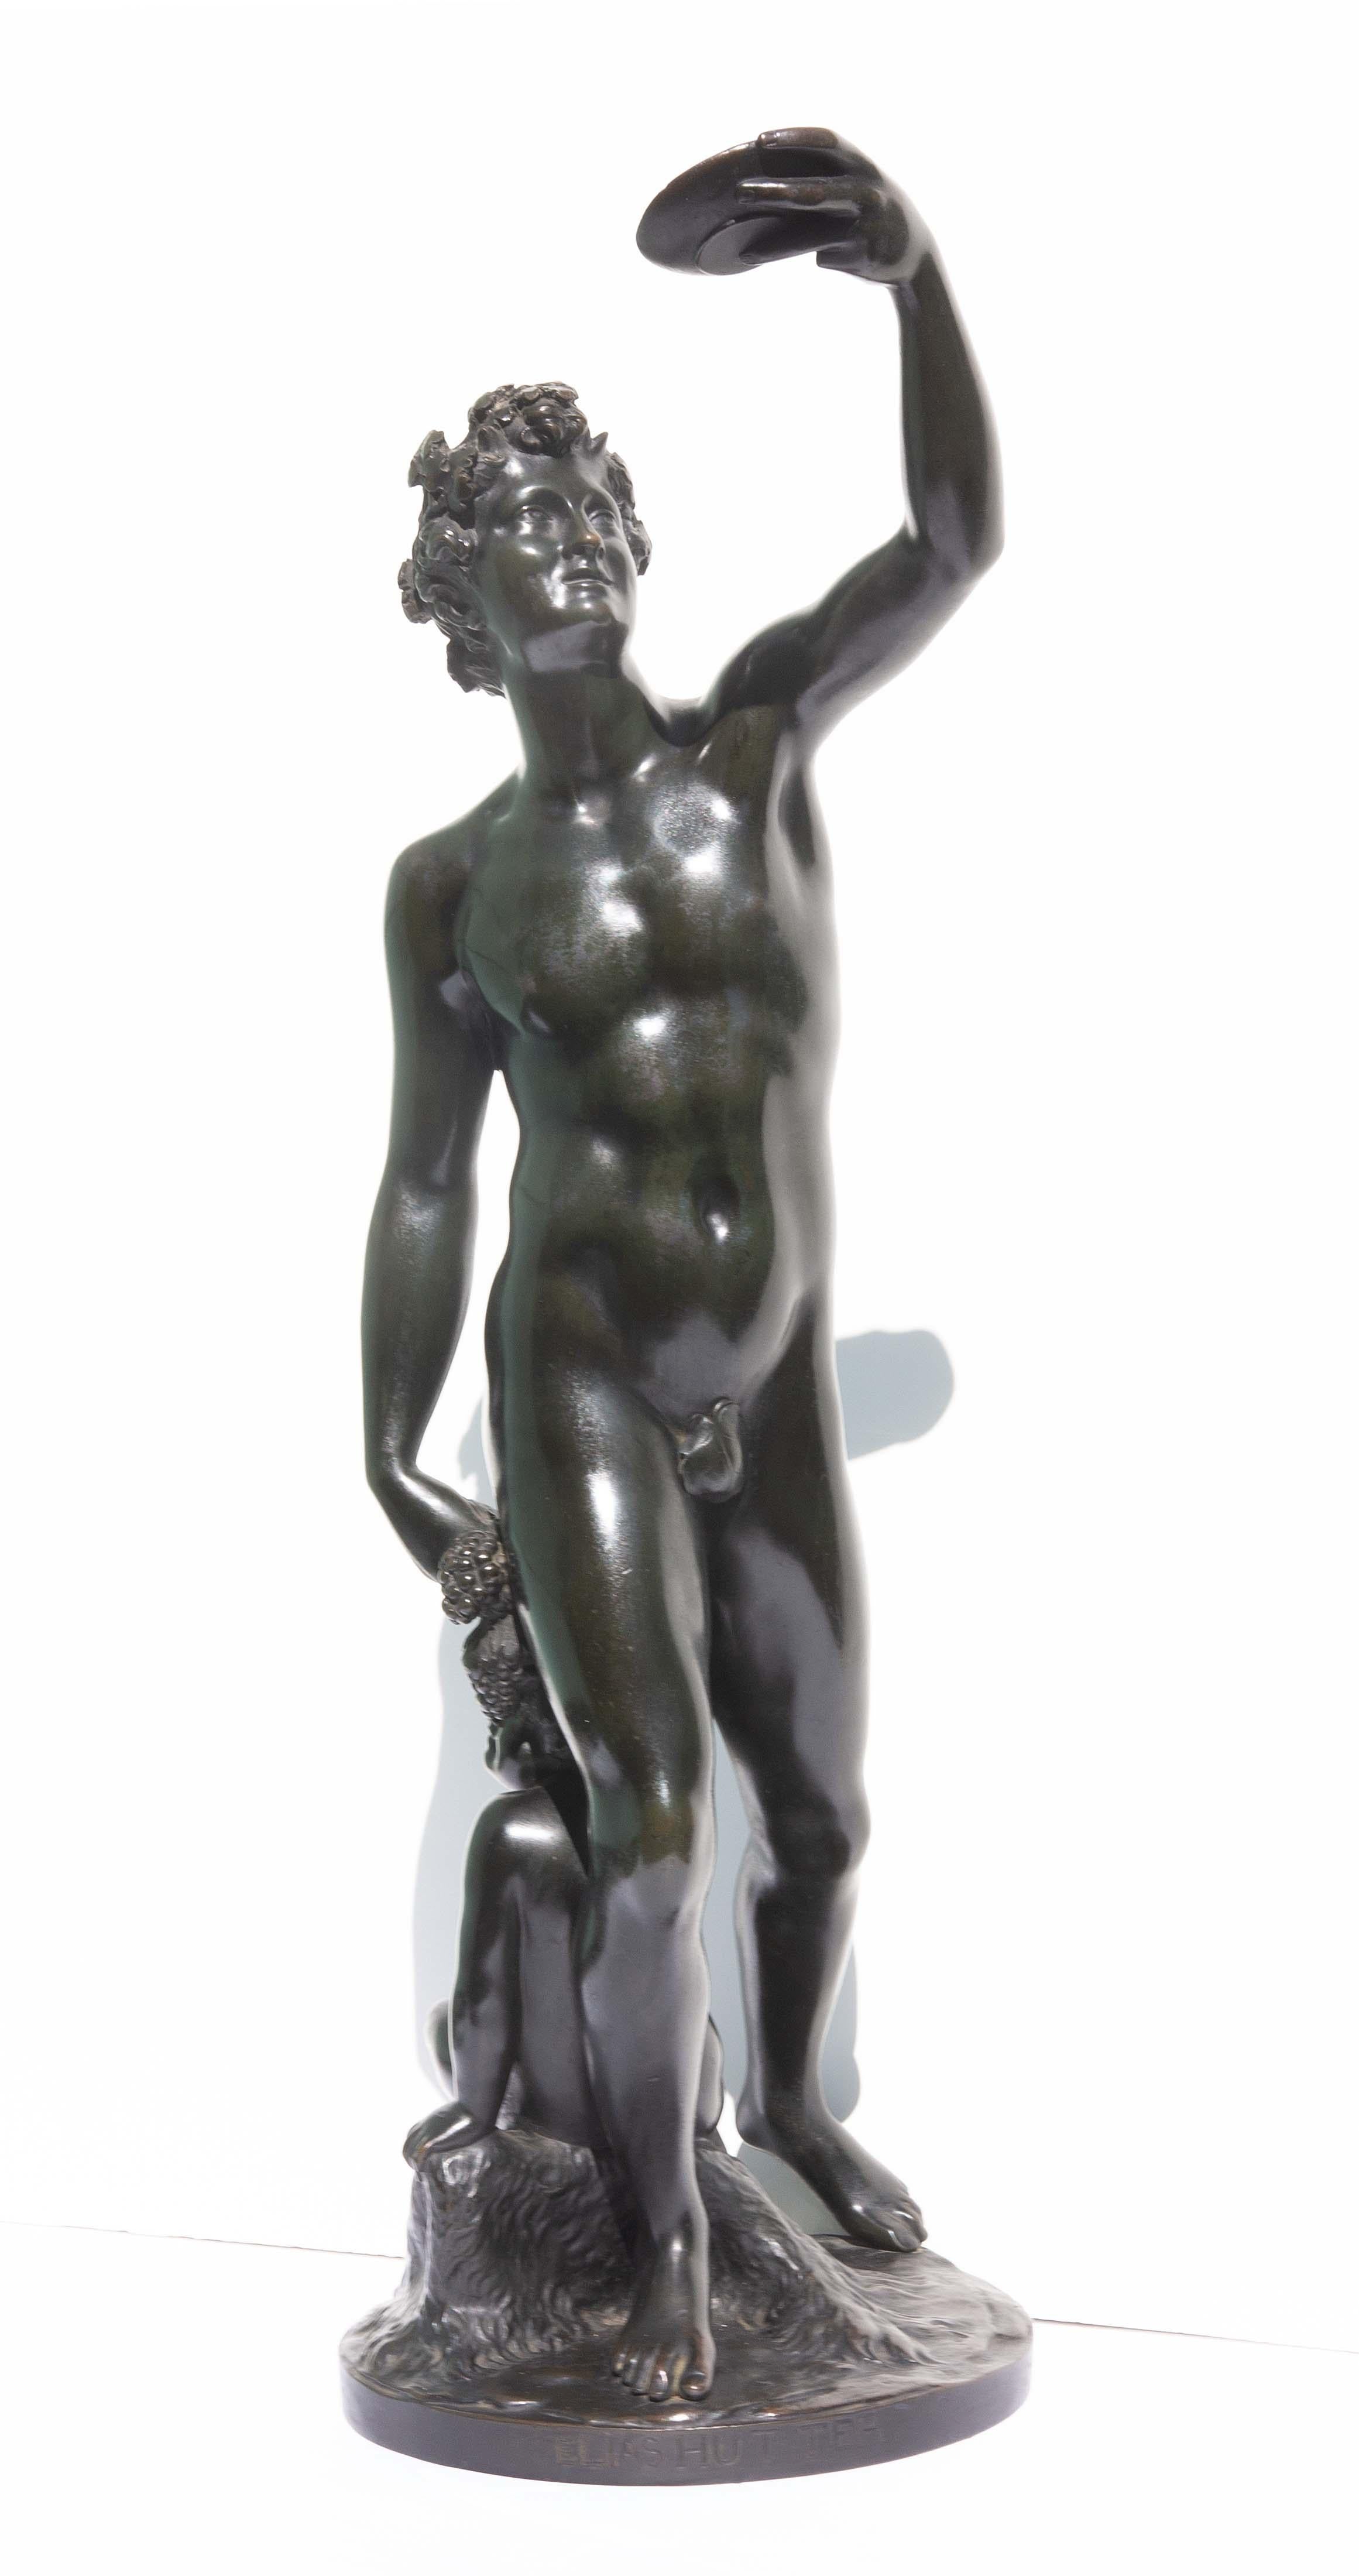 Neoclassical bronze sculpture of a young Bacchus and fawn making an offering Elias Hutter. Very fine casting with a rich patina. Early to mid 19th century. 
Elias Hutter: (Vienna 1774 - 1865): studied at the Vienna Academy, 1789 apprentice under